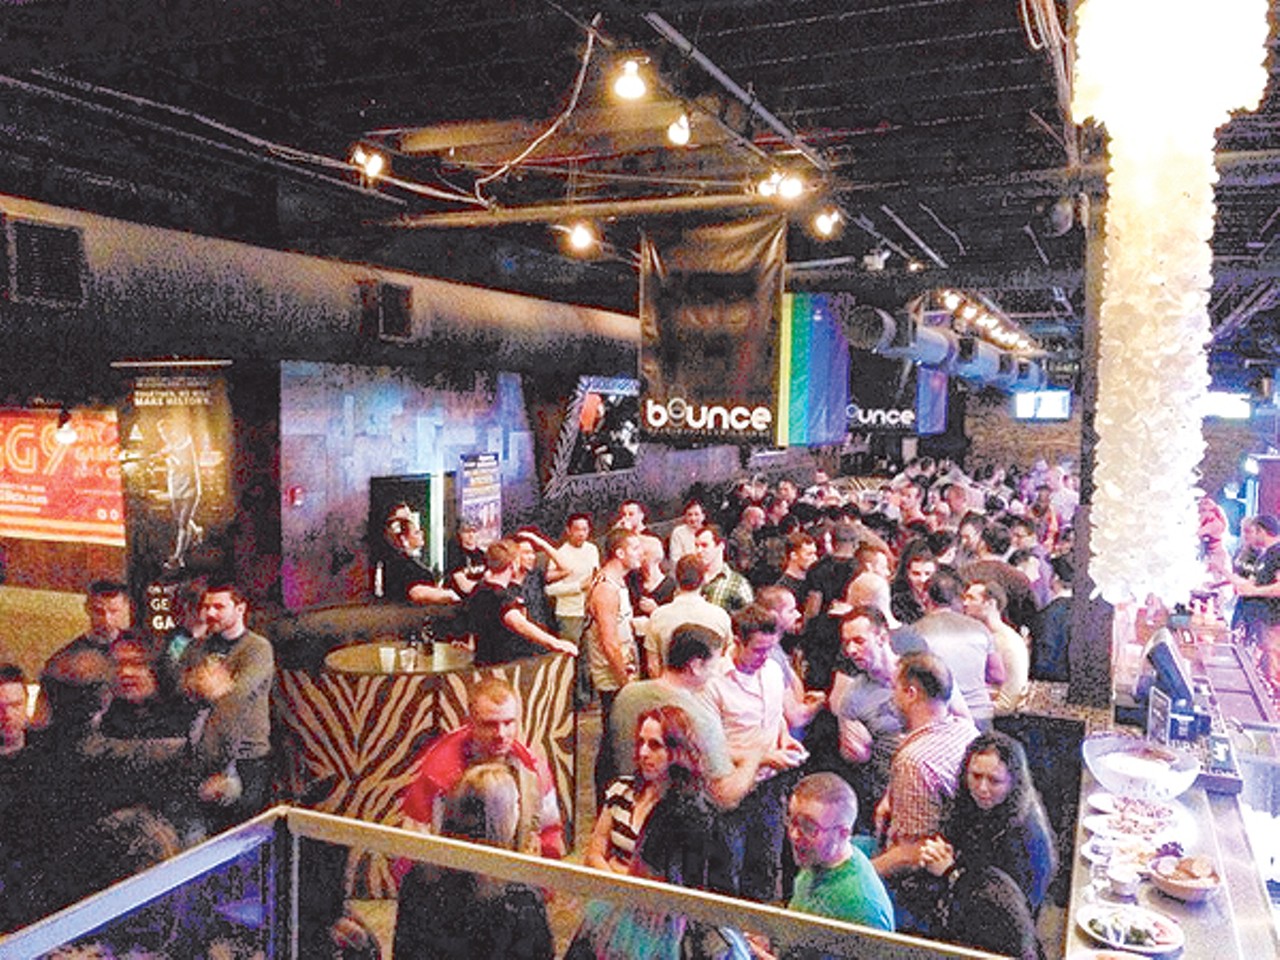 Bounce is Cleveland's hottest LGBT bar, located at 2814 Detroit Ave. They've got dynamite events every night this week, but tonight, enjoy the Neon Party hosted by Kari Nickels with special guest Pepper Mashay.